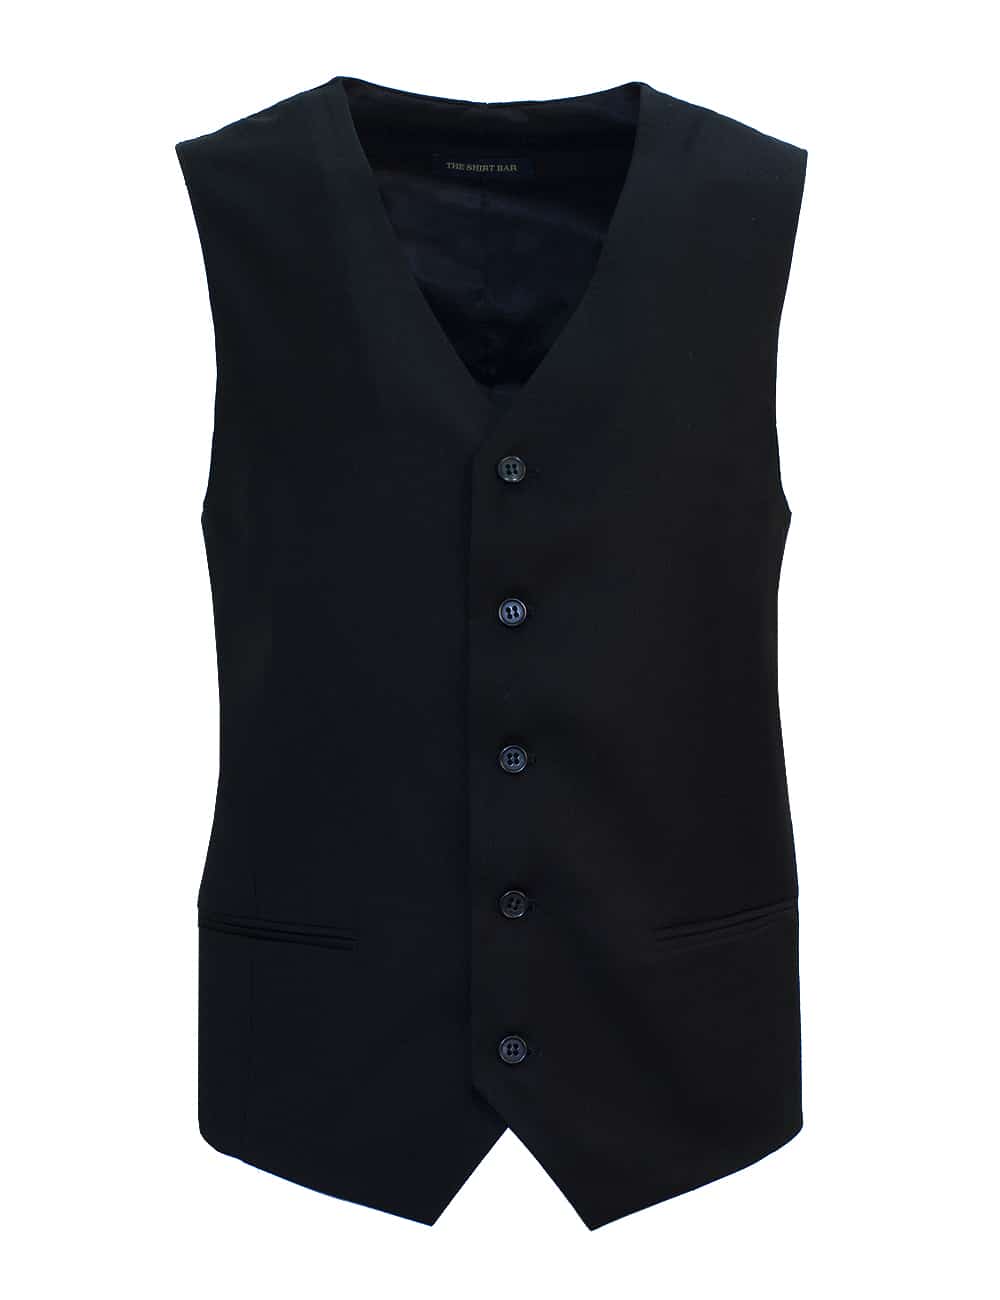 Solid Black Slim / Tailored Fit Single Breasted Vest | The Shirt Bar